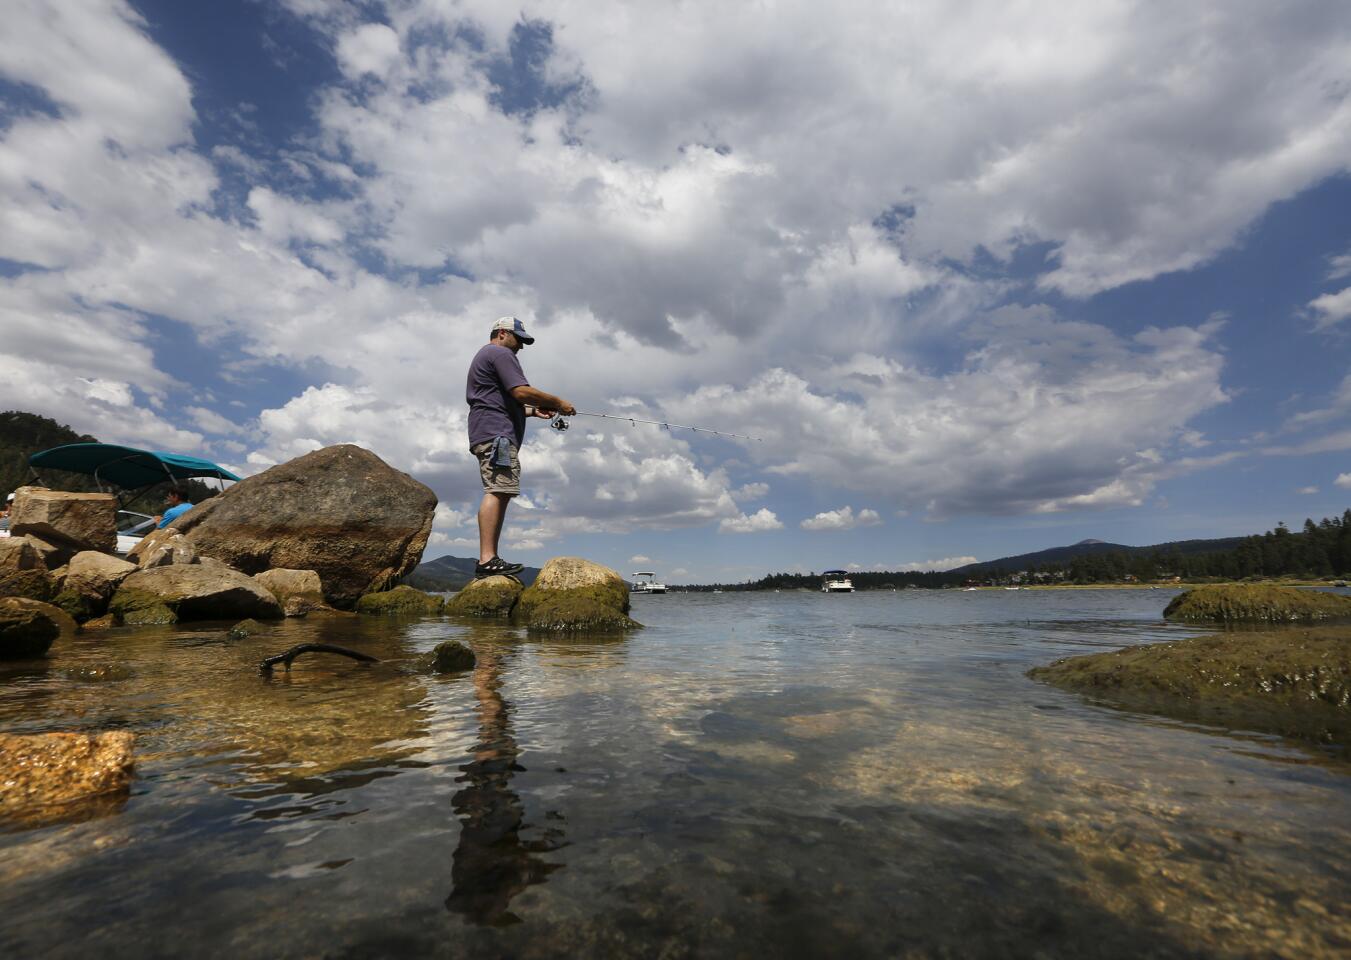 Ventura resident Robert Hirschhorn fishes along the north shore of Big Bear Lake, not knowing that it is one of 187 reservoirs formally designated by state water regulators this year as "mercury impaired."